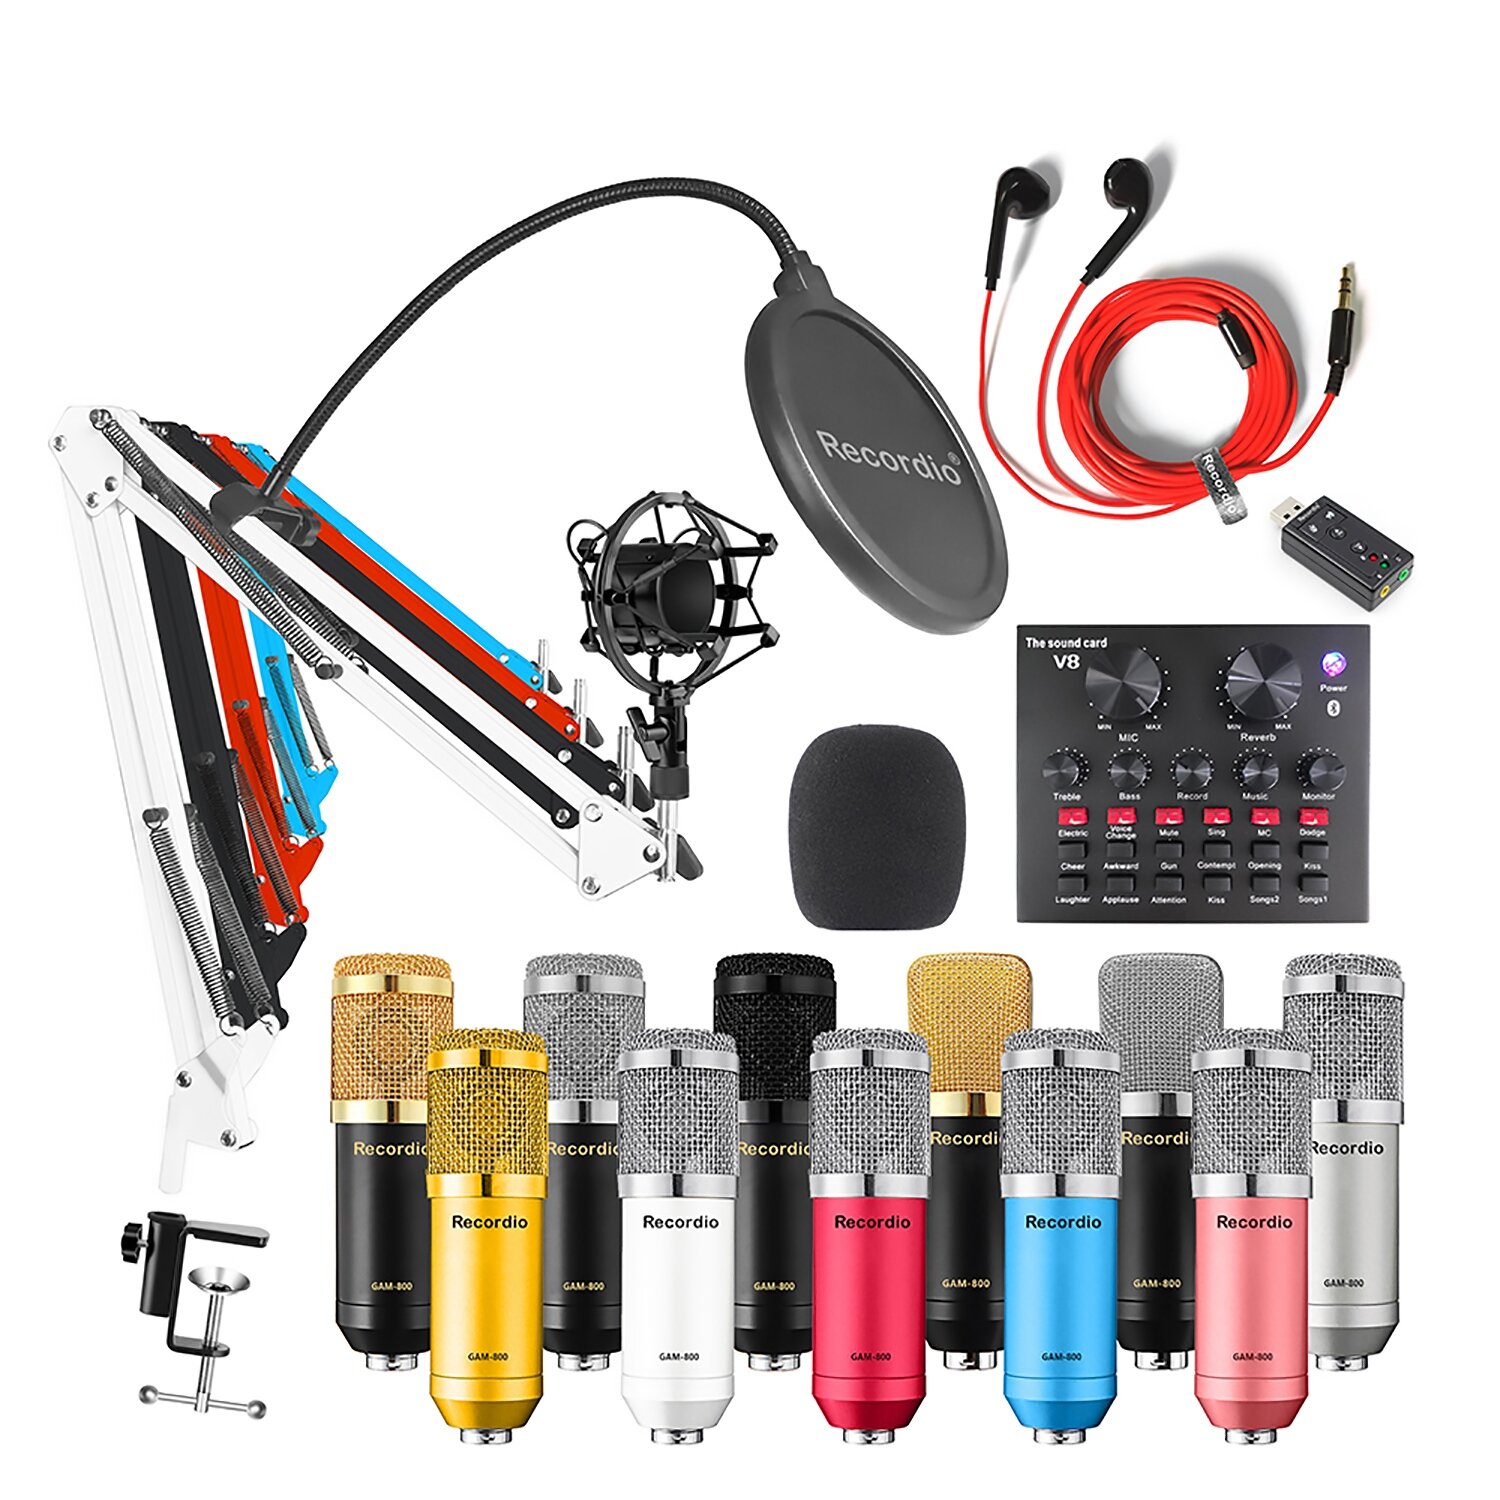 Image of GAM-800W Microphone Condenser Sound Recording Microphone Kit With V8 Sound Card For Radio Braodcasting Singing Recording